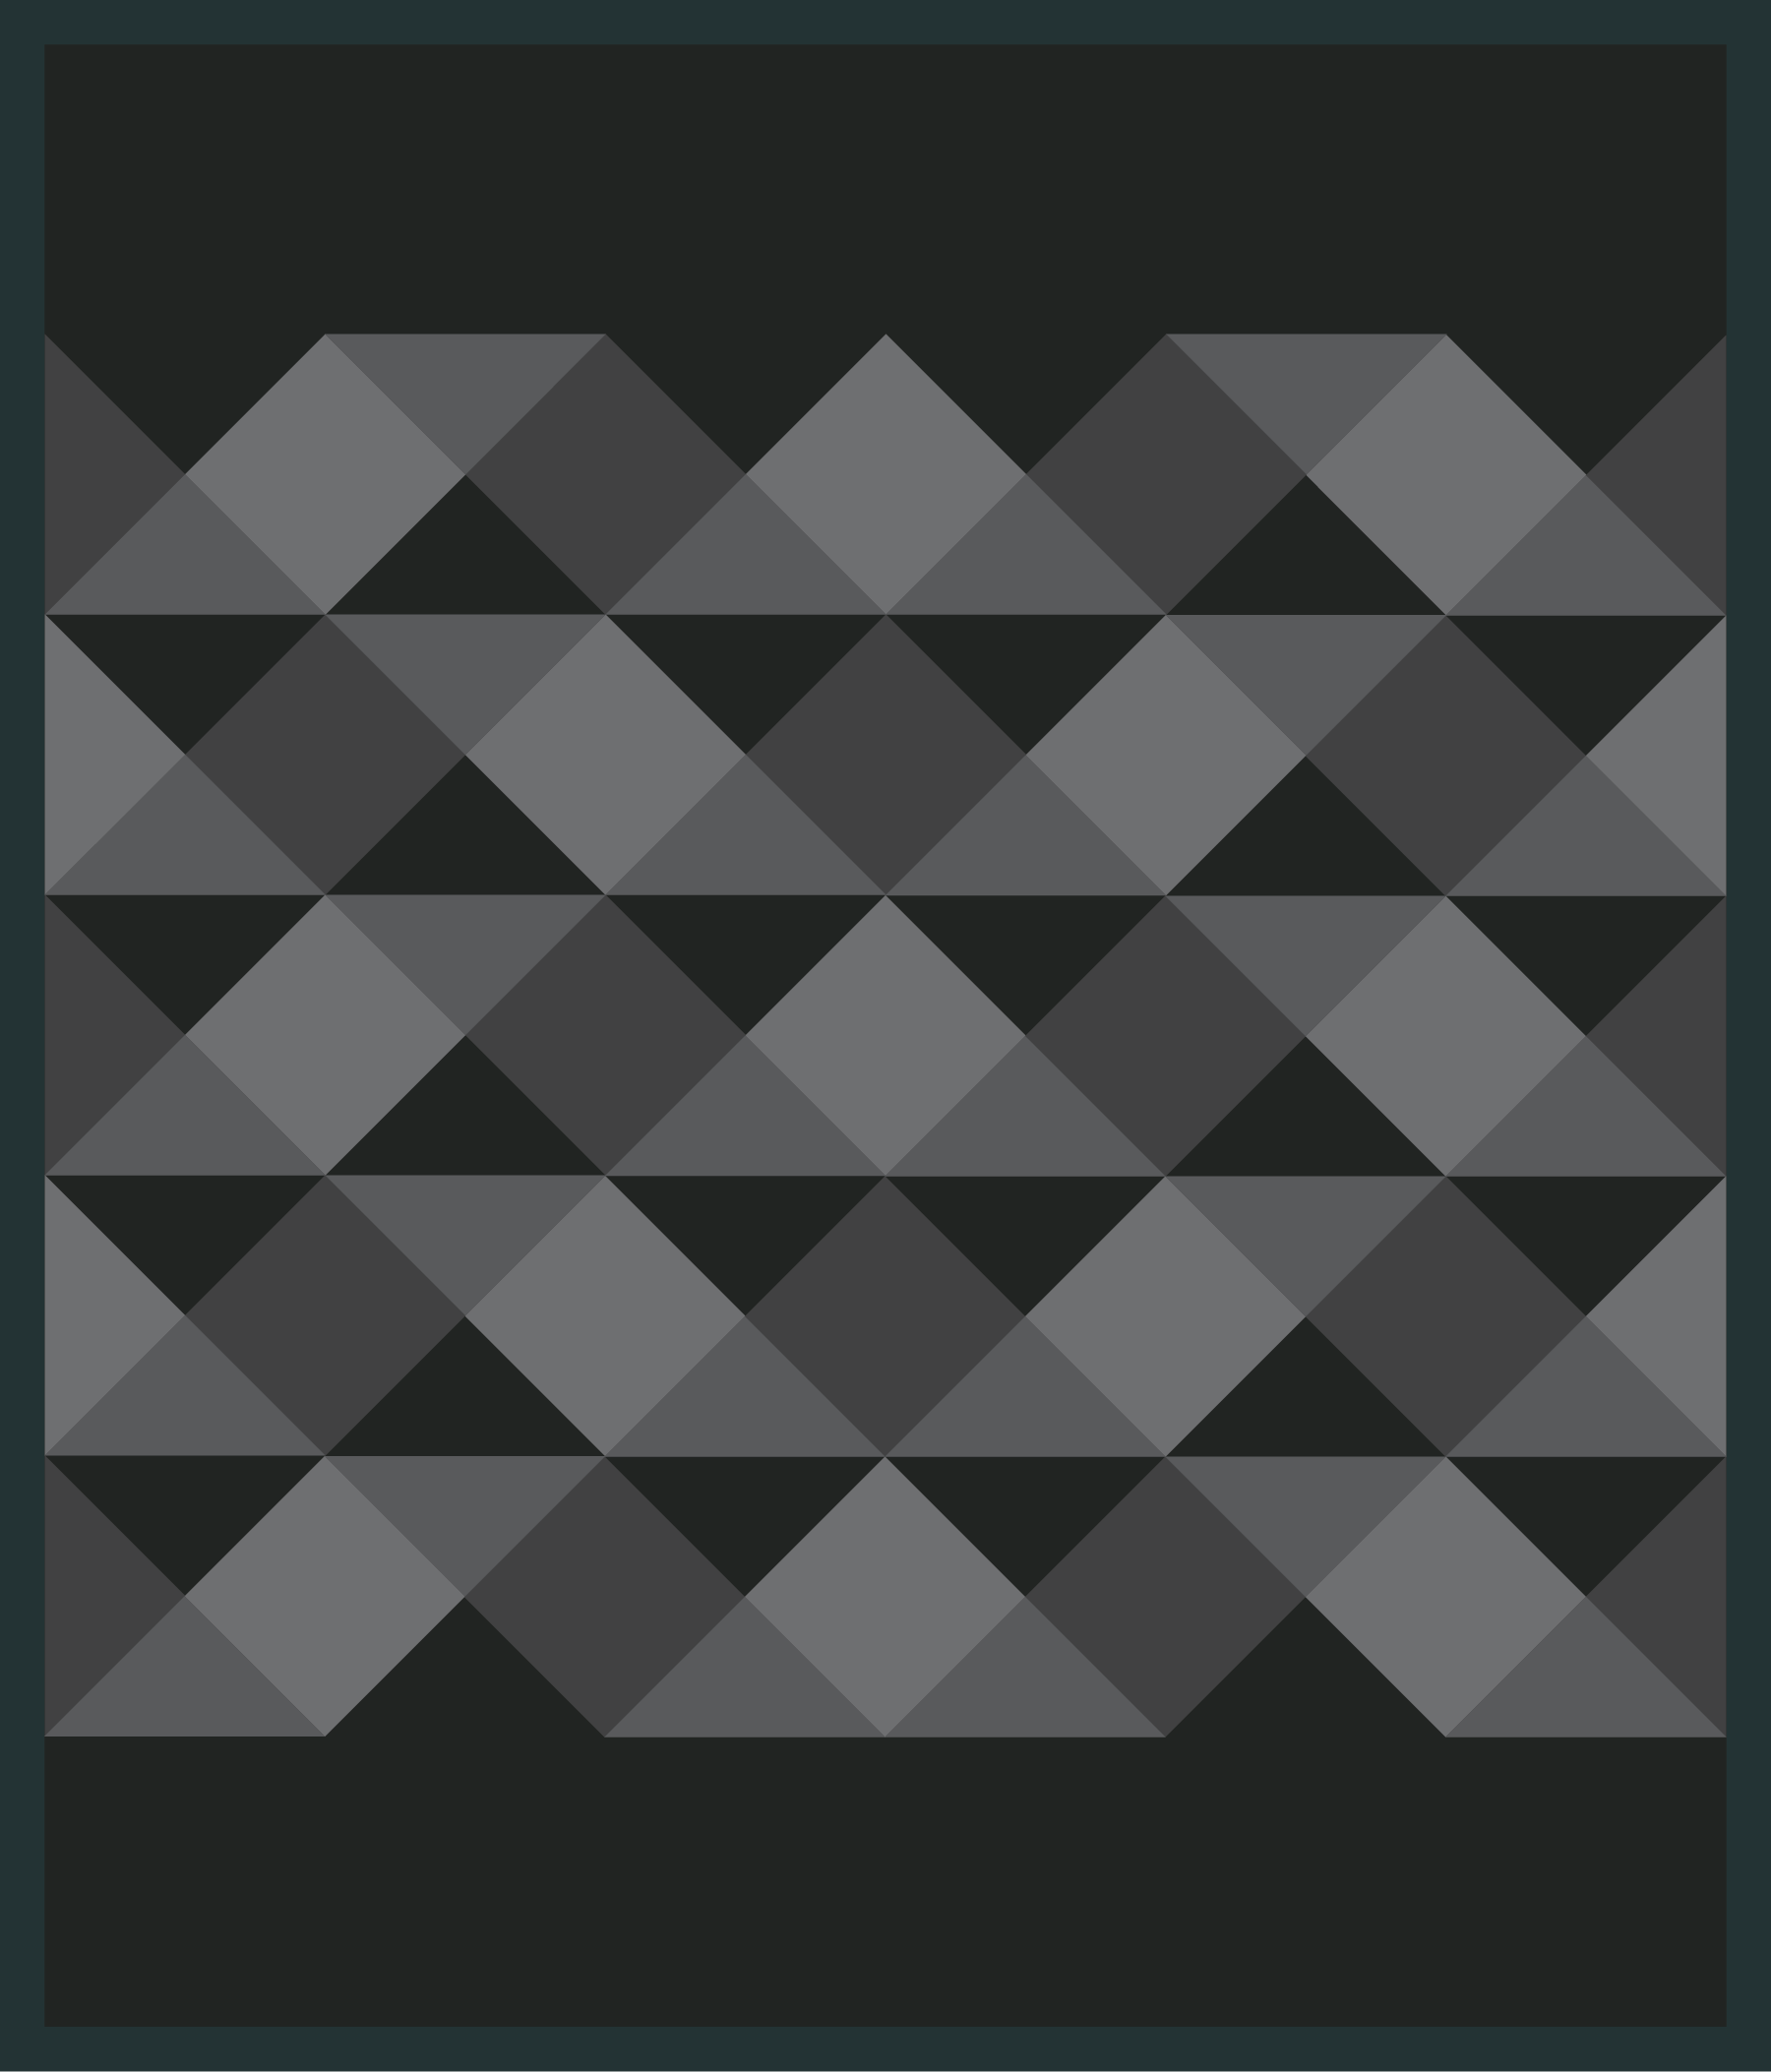 Sea Breeze quilt mockup in dark greys by Sewfinity